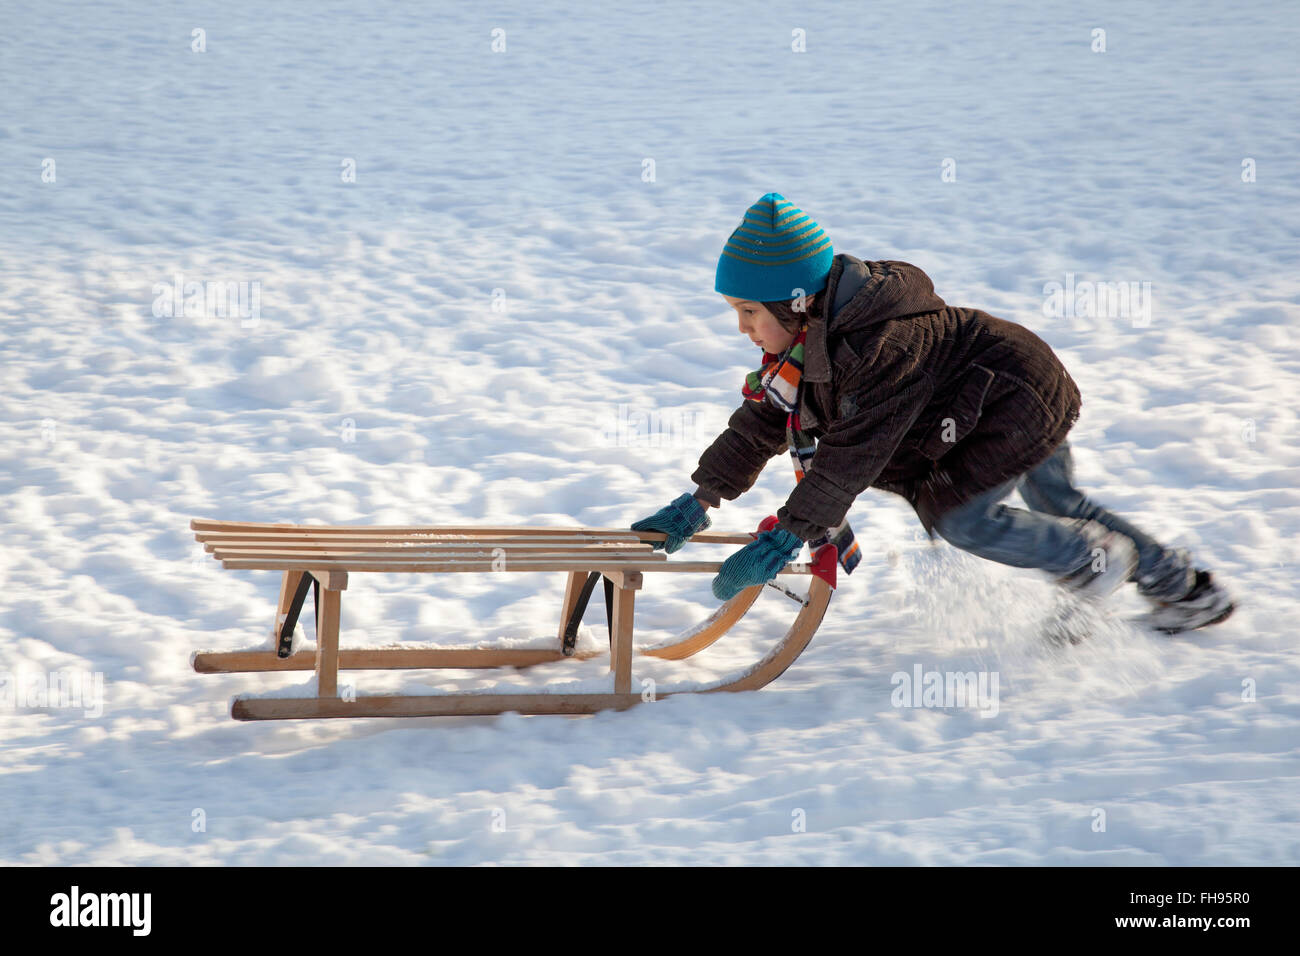 Little boy pushing sled uphills in the snow Stock Photo